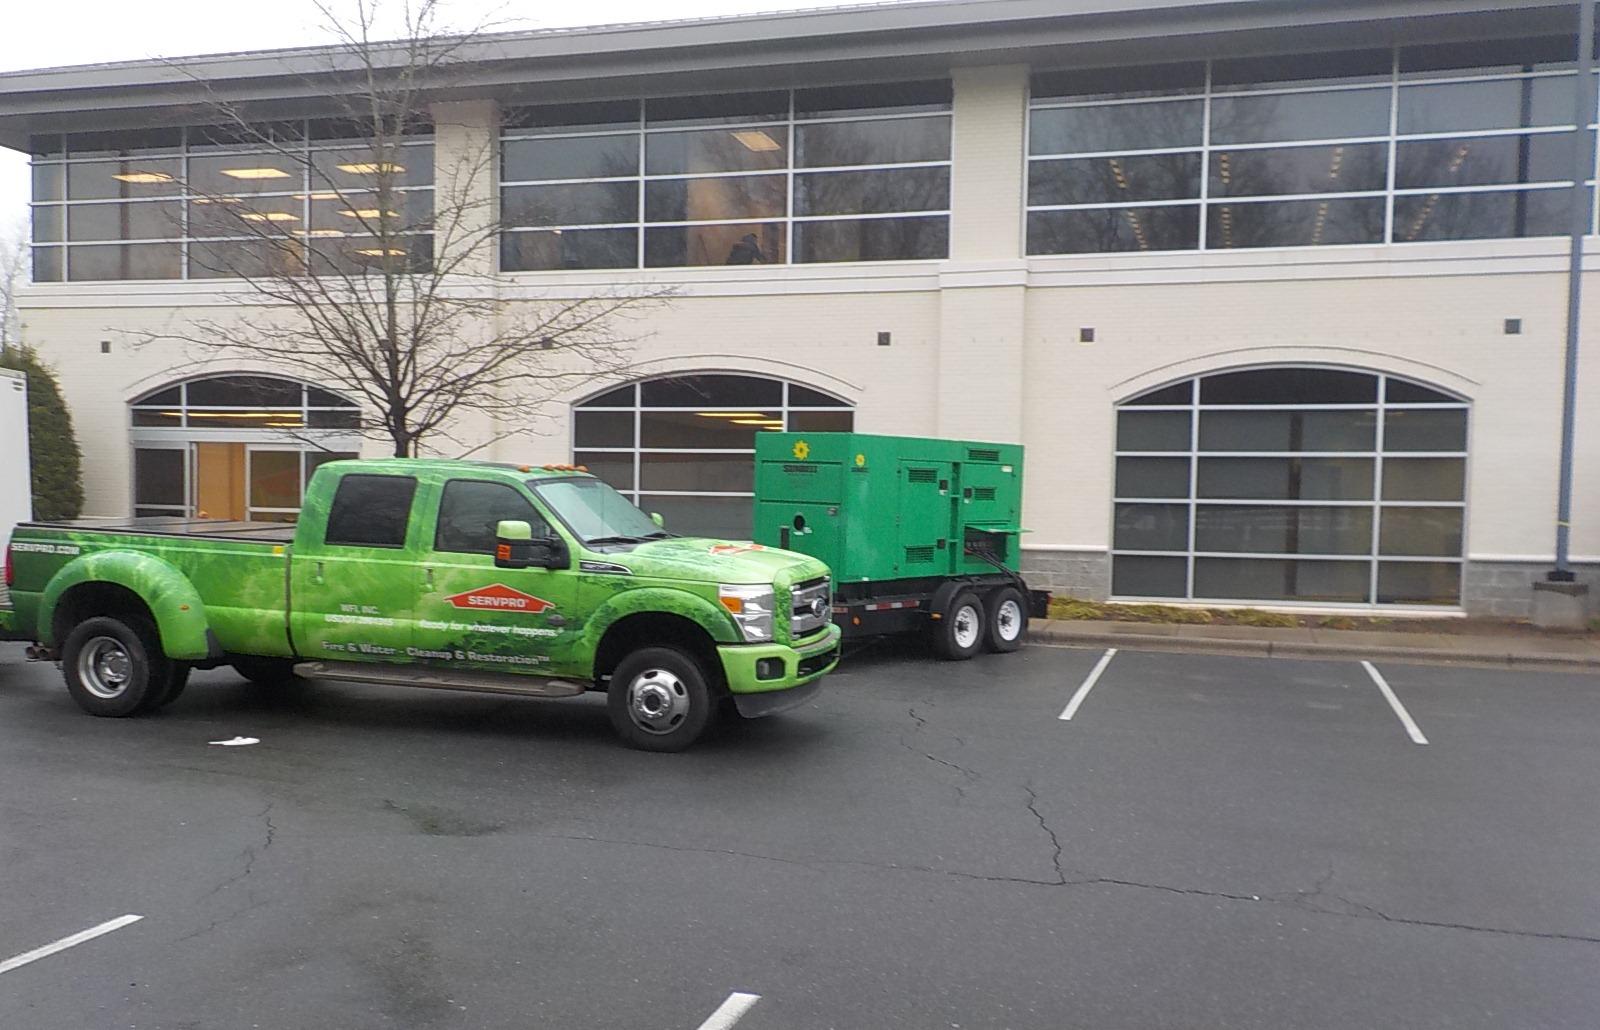 SERVPRO of West Mecklenburg County Photo